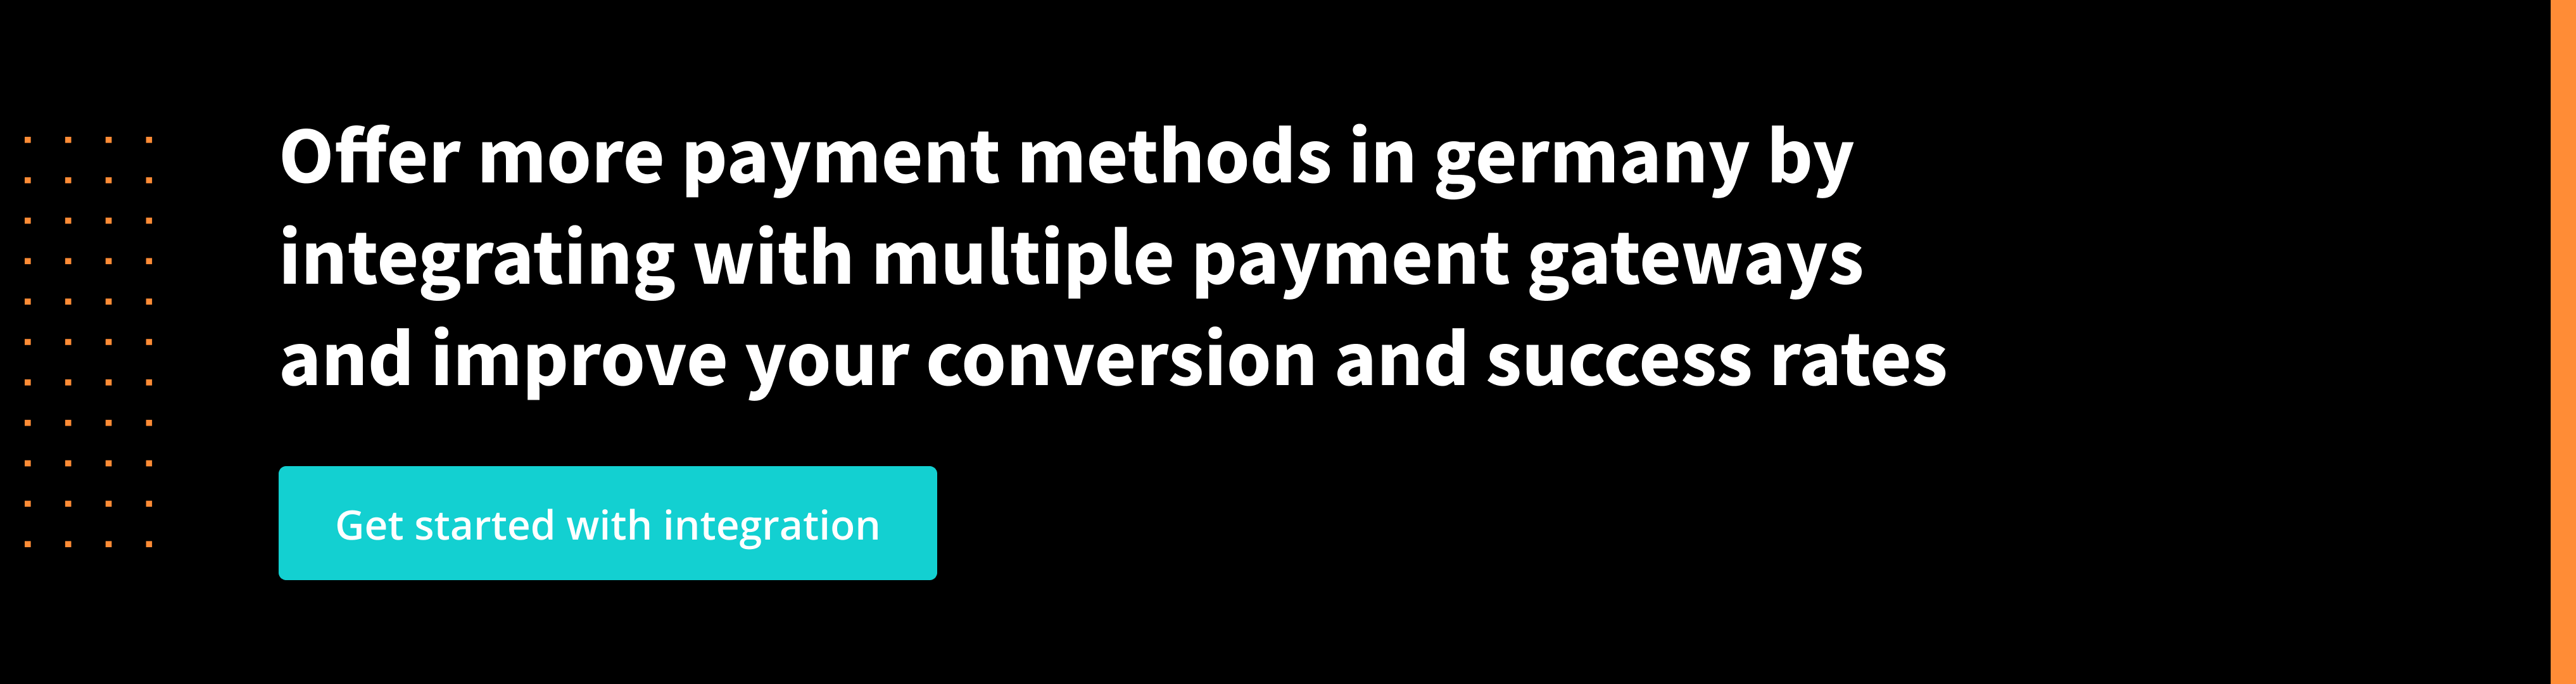 Integrate with multiple payment gateway